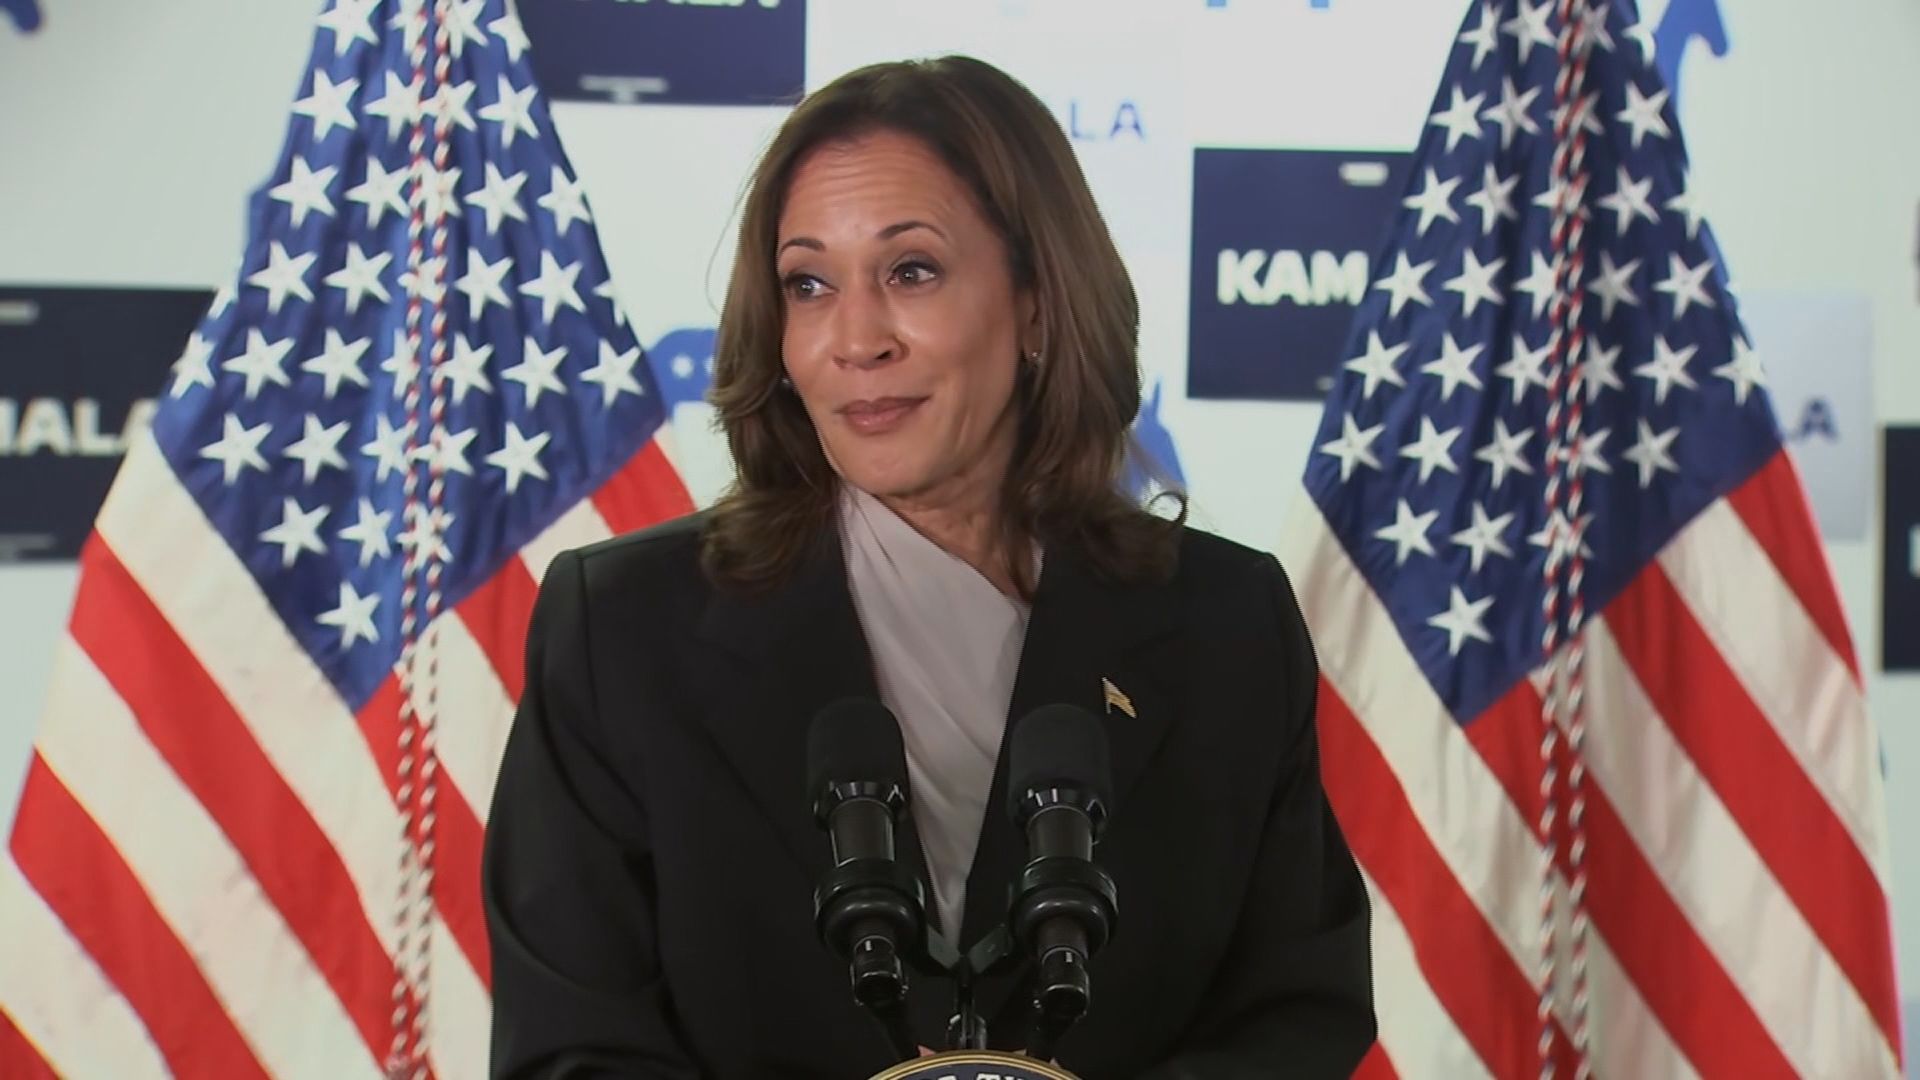 Harris Tightens Trump's Lead in Polls, Too Soon to Tell If Numbers Will Hold